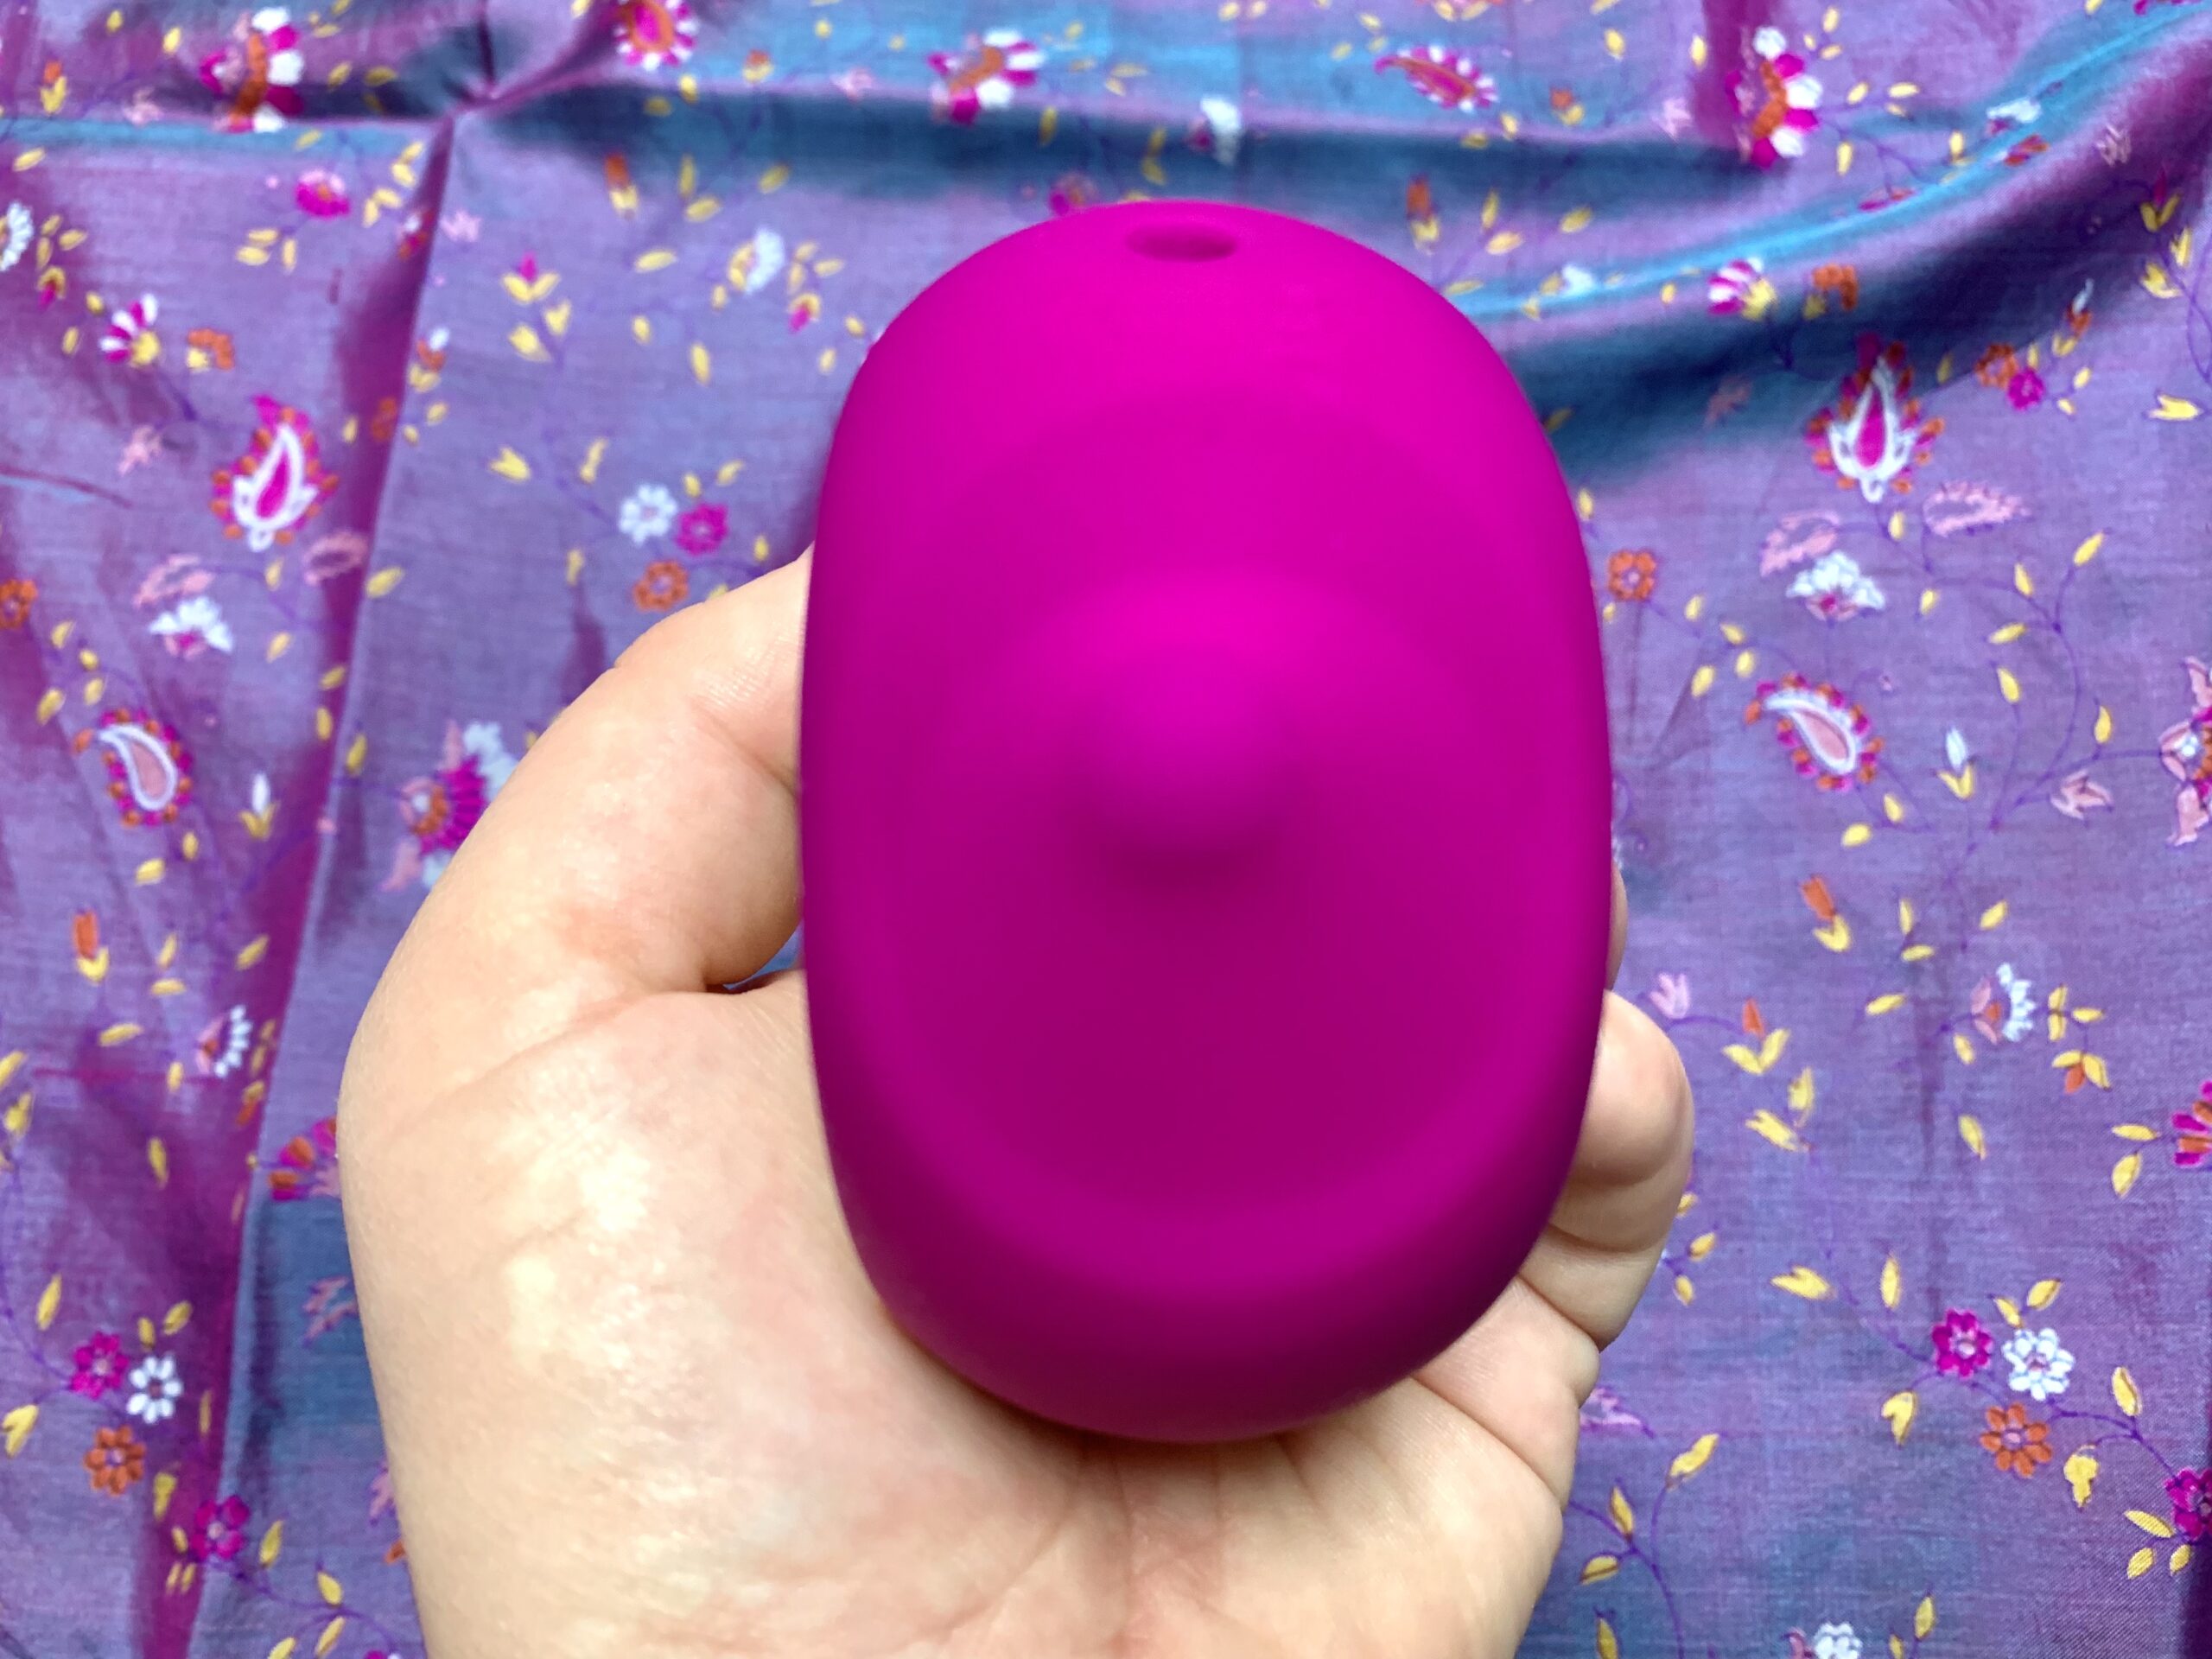 Lelo Ora 3 The Lelo Ora 3: Does it Deliver on Performance?